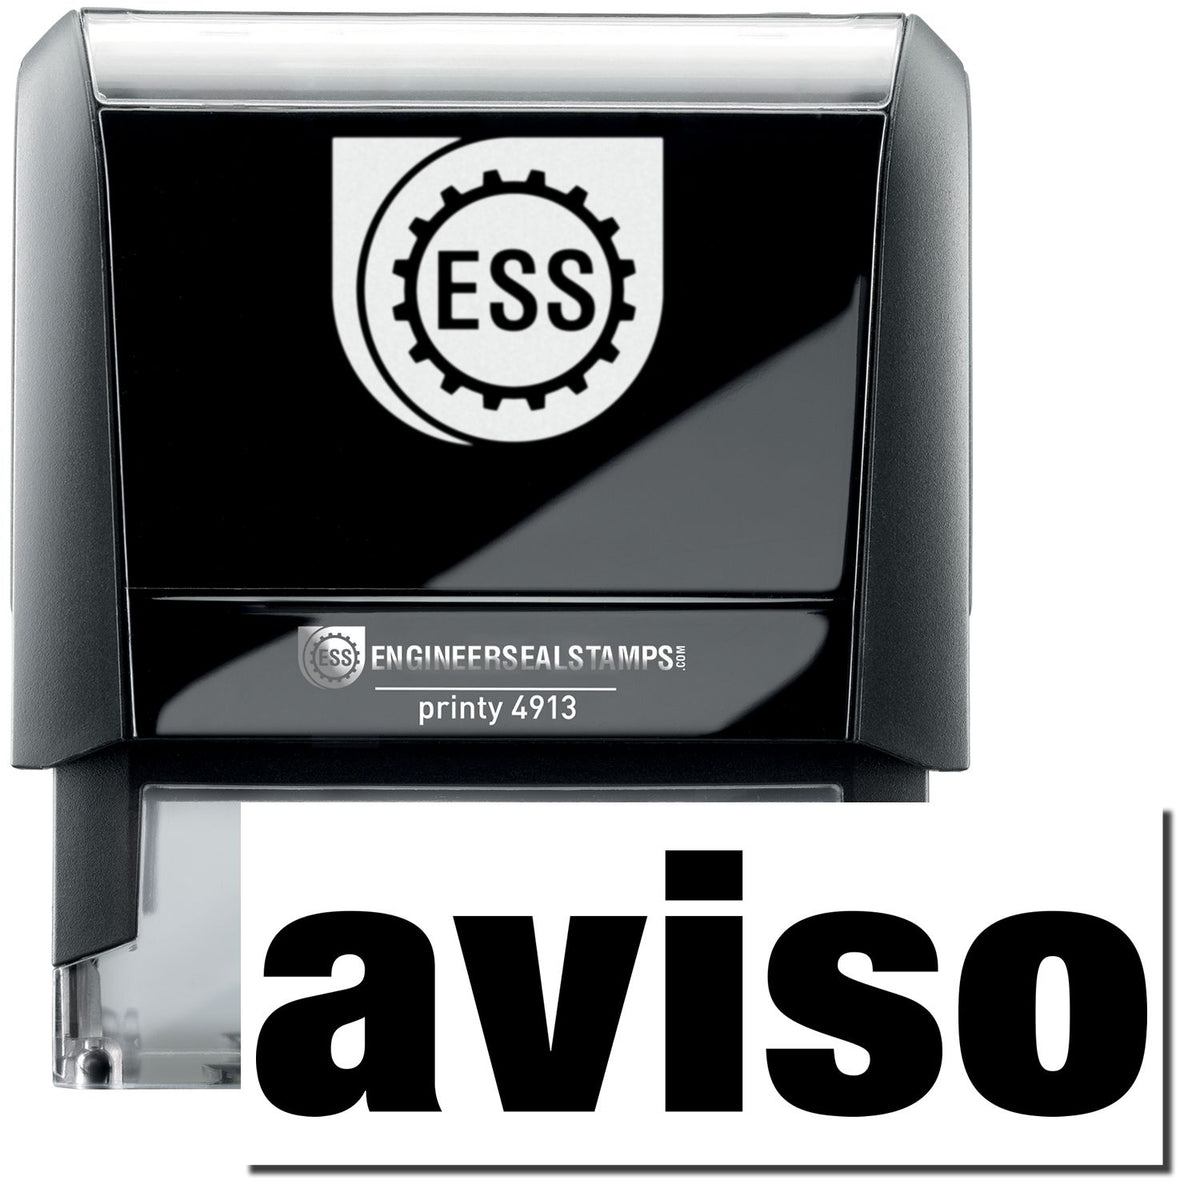 A self-inking stamp with a stamped image showing how the text &quot;aviso&quot; in a large font is displayed by it after stamping.